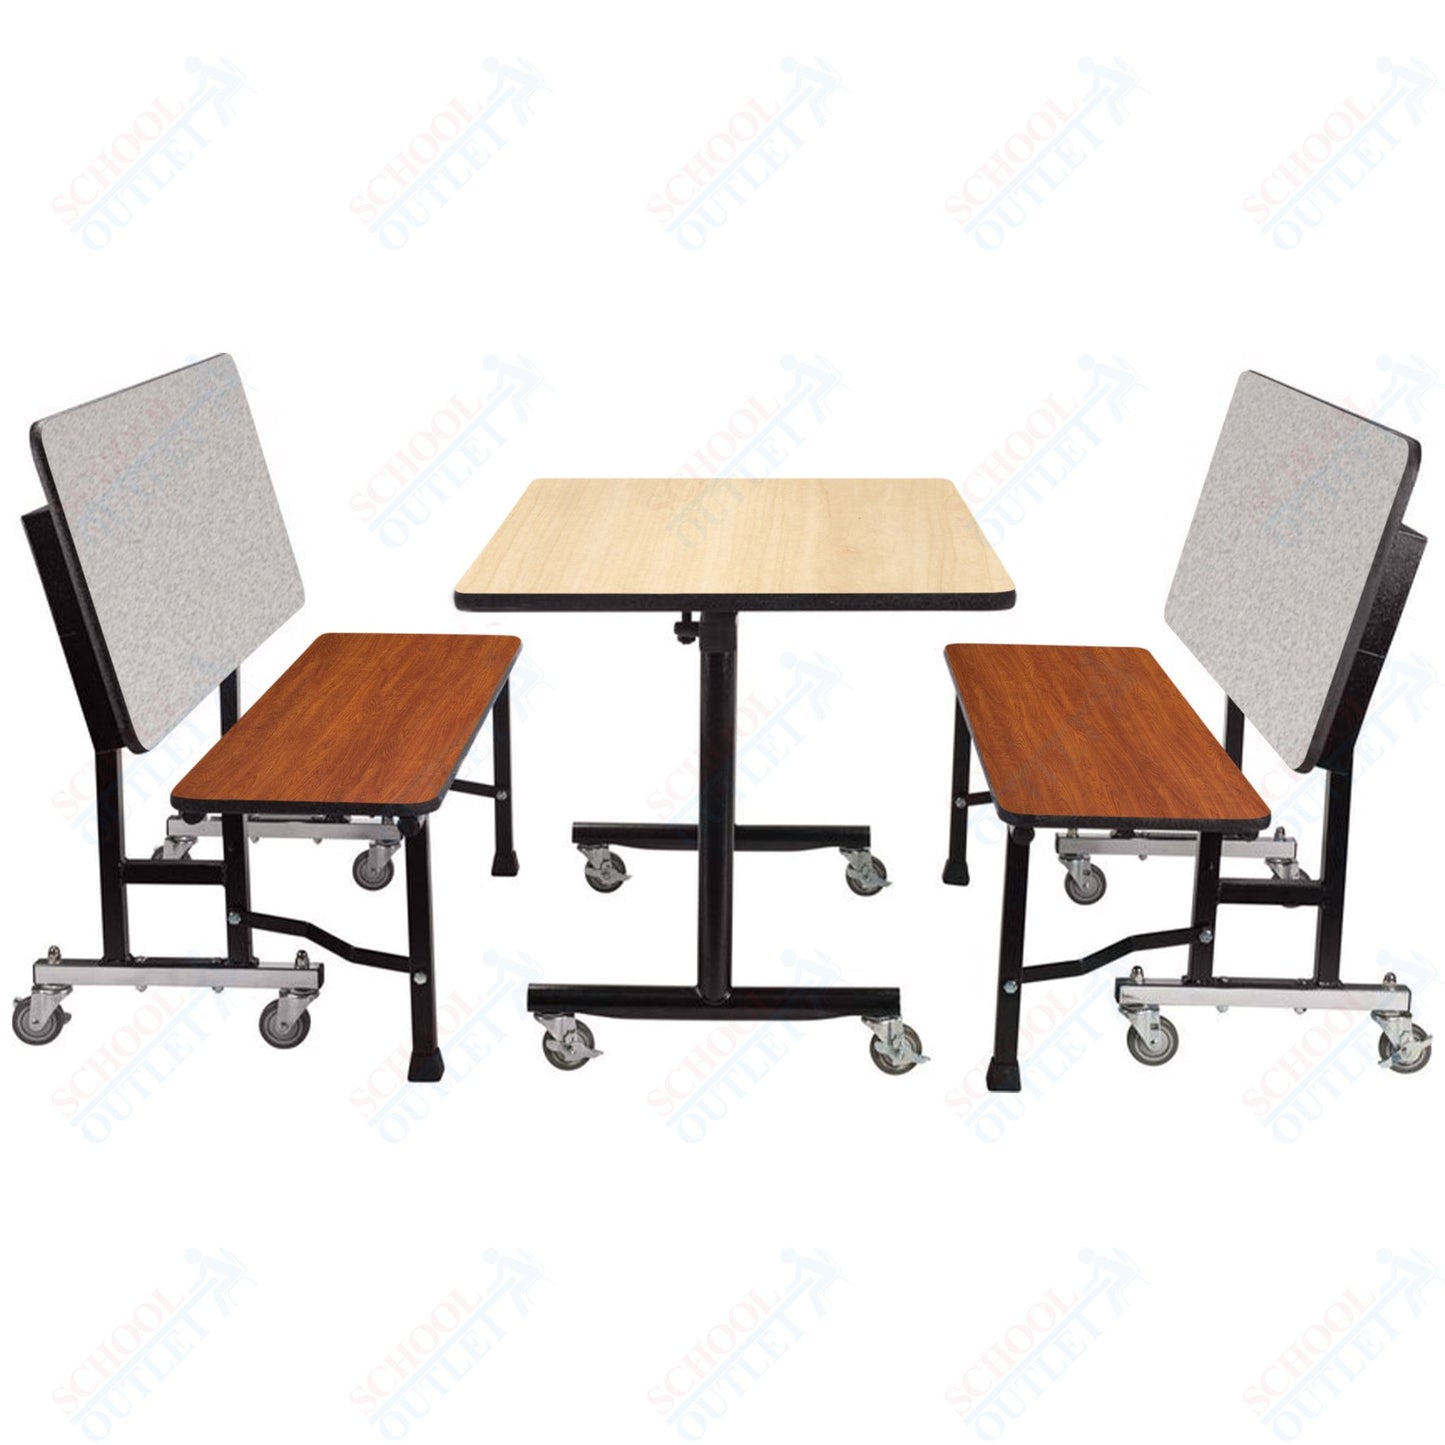 NPS ToGo Booth Set, (1) 30"x48" Table and (2) 48" Benches, MDF Core (National Public Seating NPS-TGBTH3048MDPE)